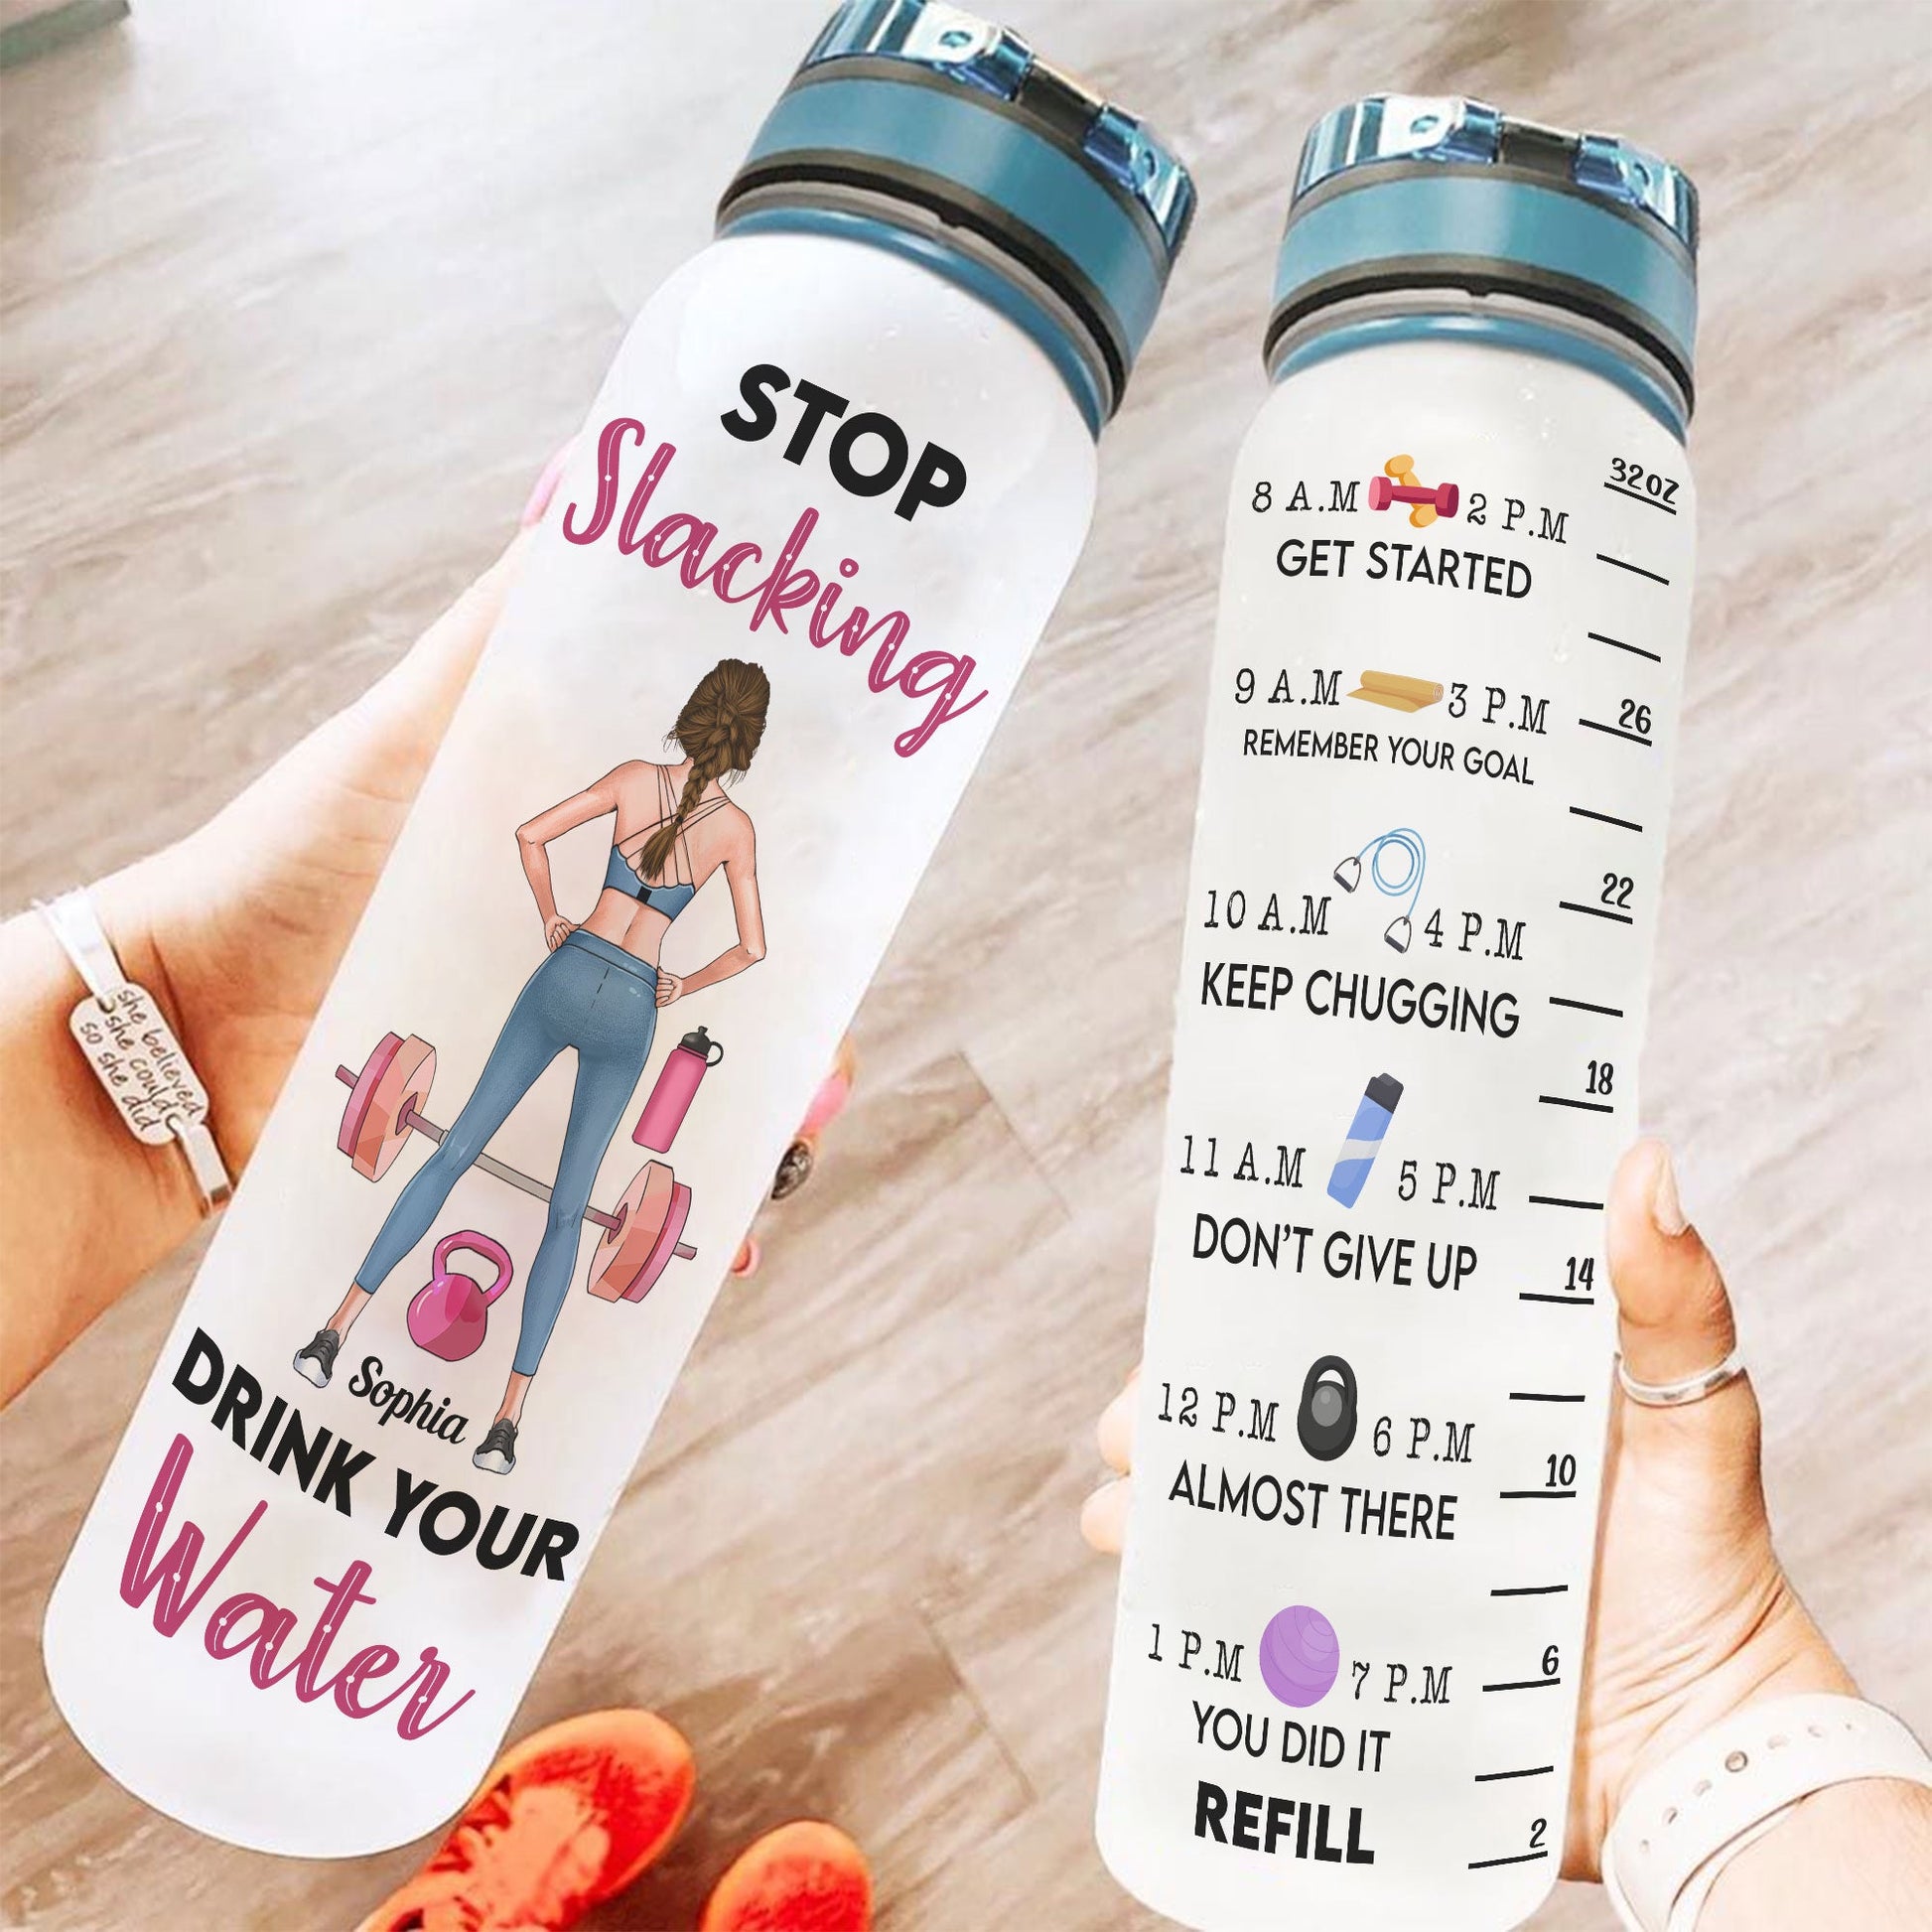 Workout Gifts, Fitness Tumbler, Fitness Gifts, Workout Water Bottle, Just a  Girl With Goals, Gym Water Bottle, Fitness Gifts for Women 